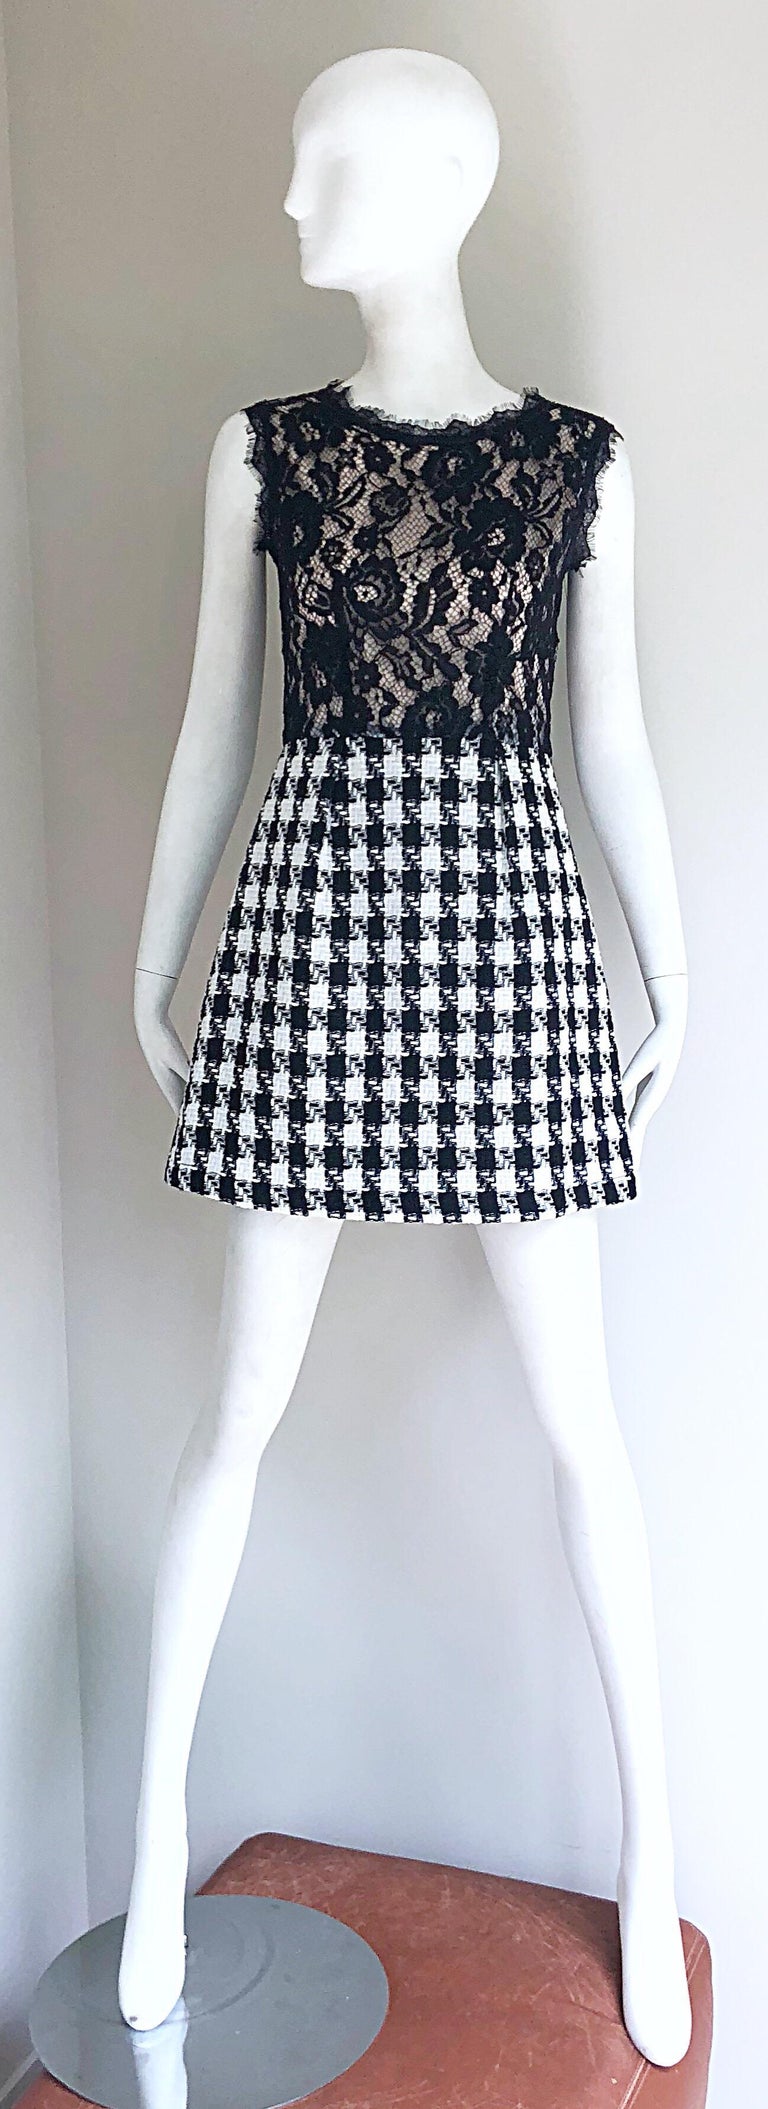 Insanely chic early 2000s MARC JACOBS black, white, and nude lace houndstooth mini dress! Features a black lace bodice with a nude underlay. Black and white houndstooth slightly flared skirt. Hidden zipper up the back with hook-and-eye closure. In